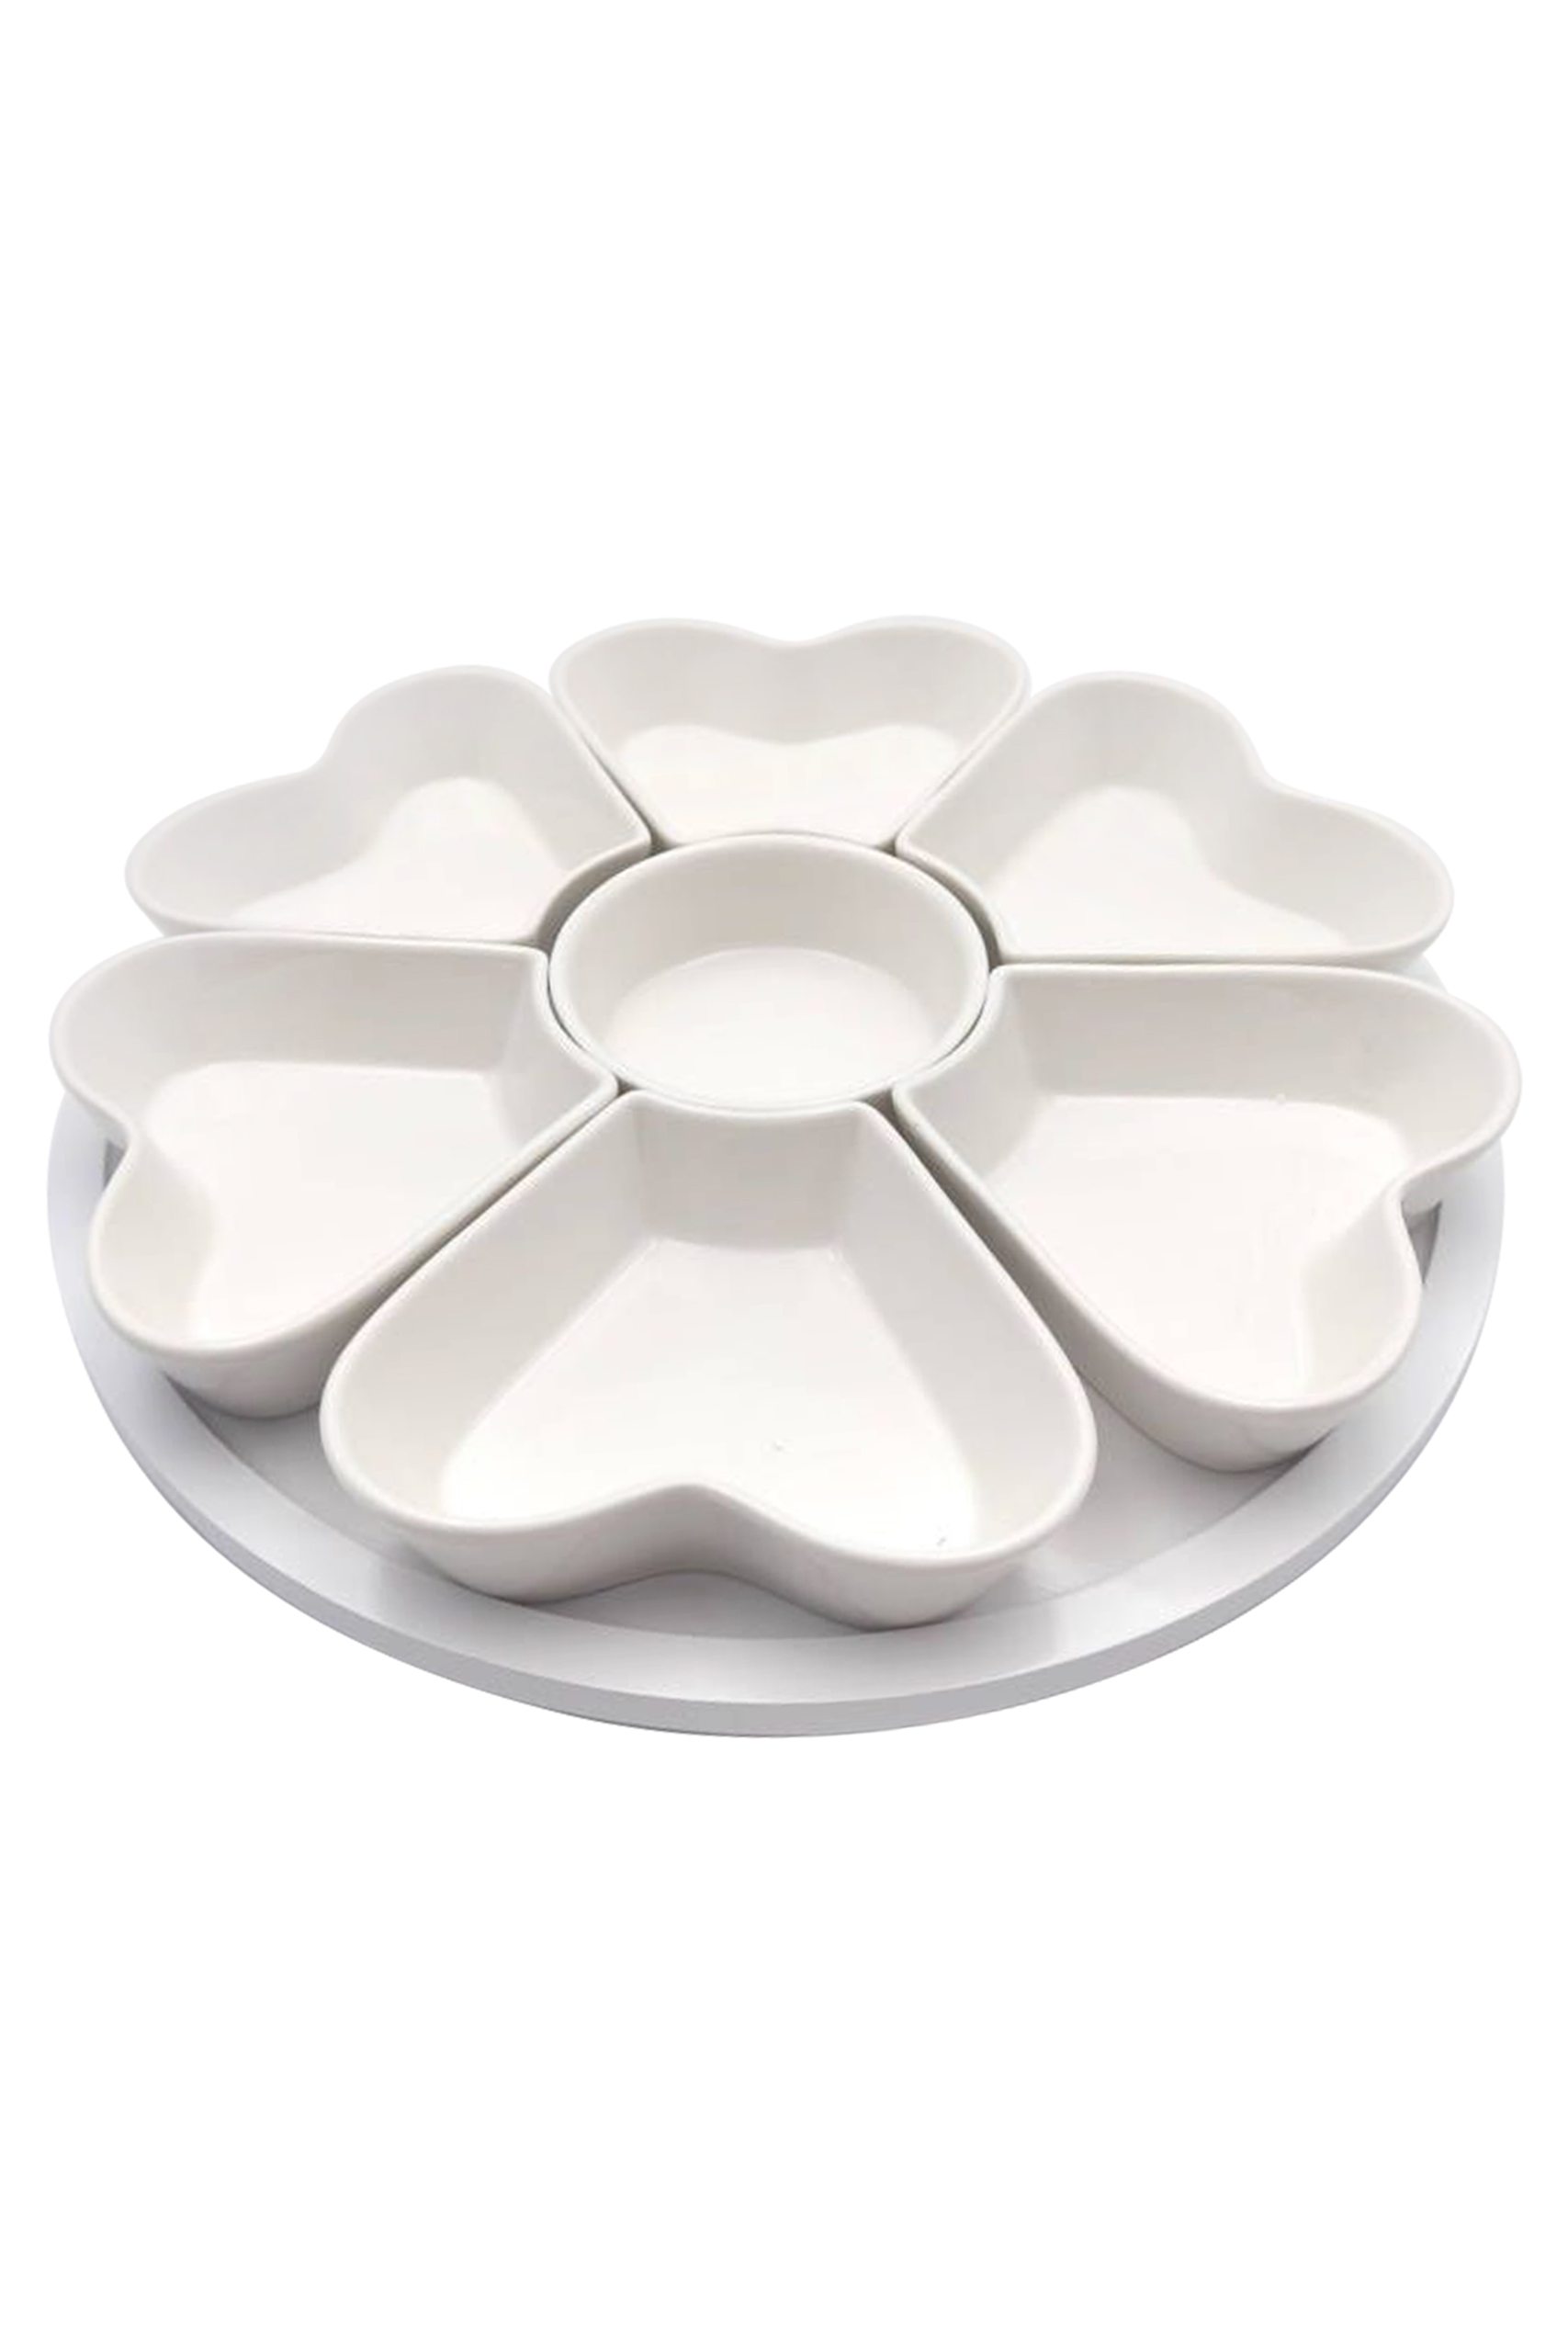 7 Pc Lazy Susan Heart Snacking Station - White | Pretty Little Home